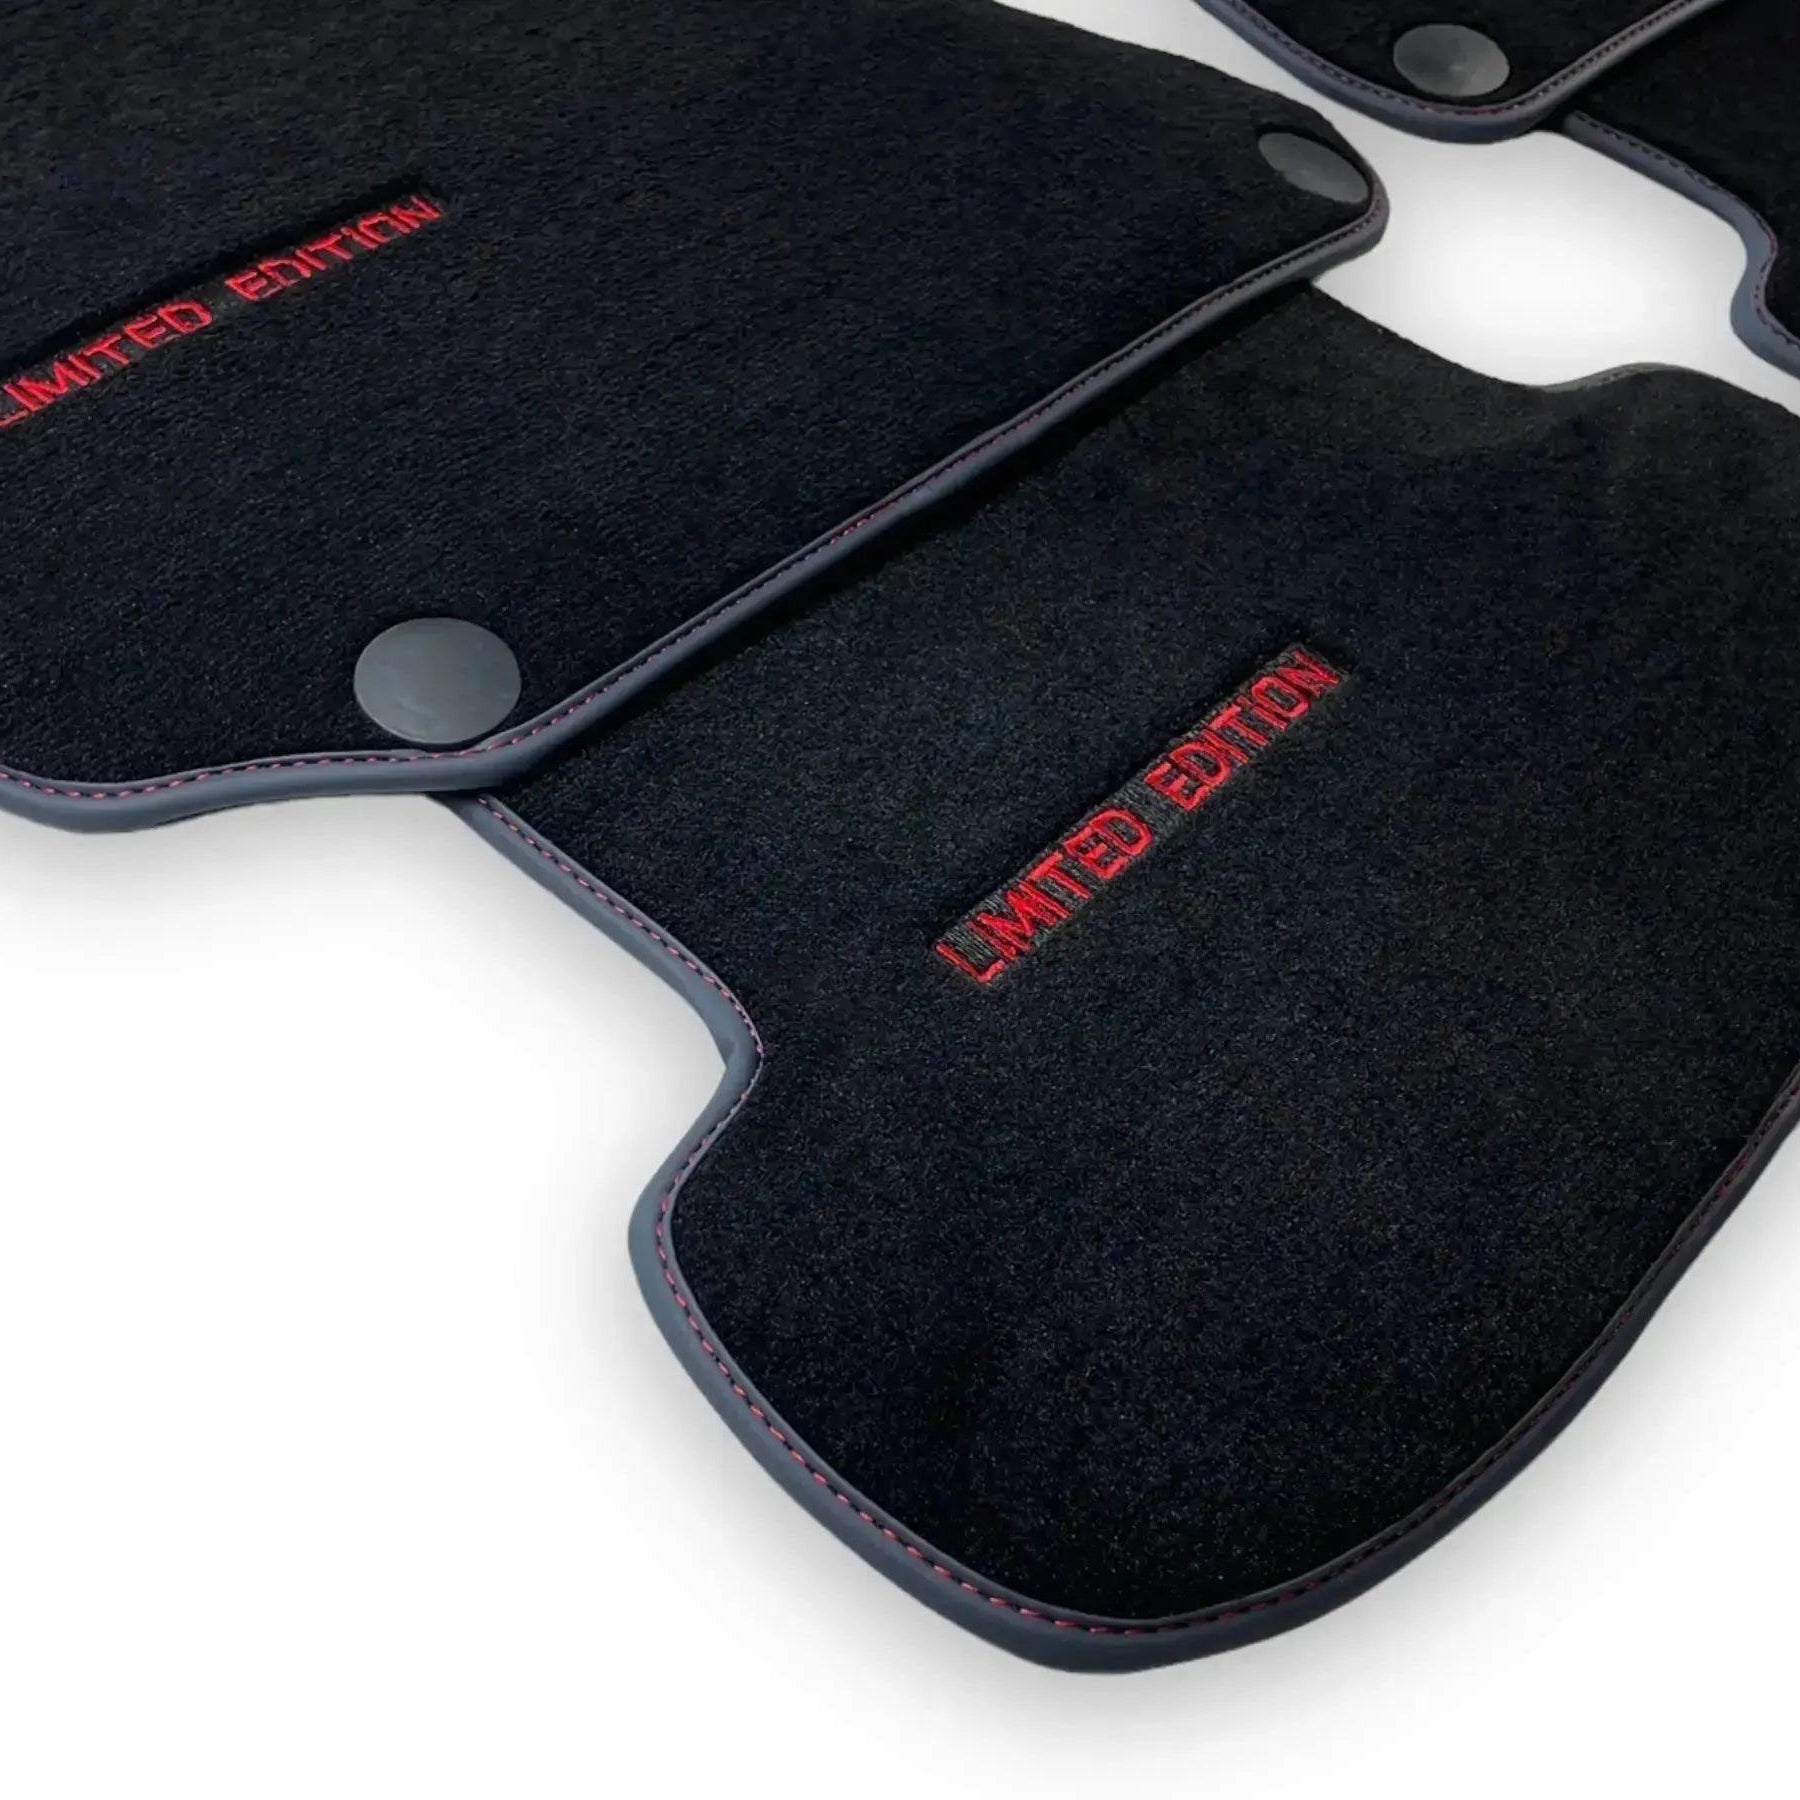 Black Floor Mats For Mercedes Benz S-Class W140 (1991-1998) | Limited Edition